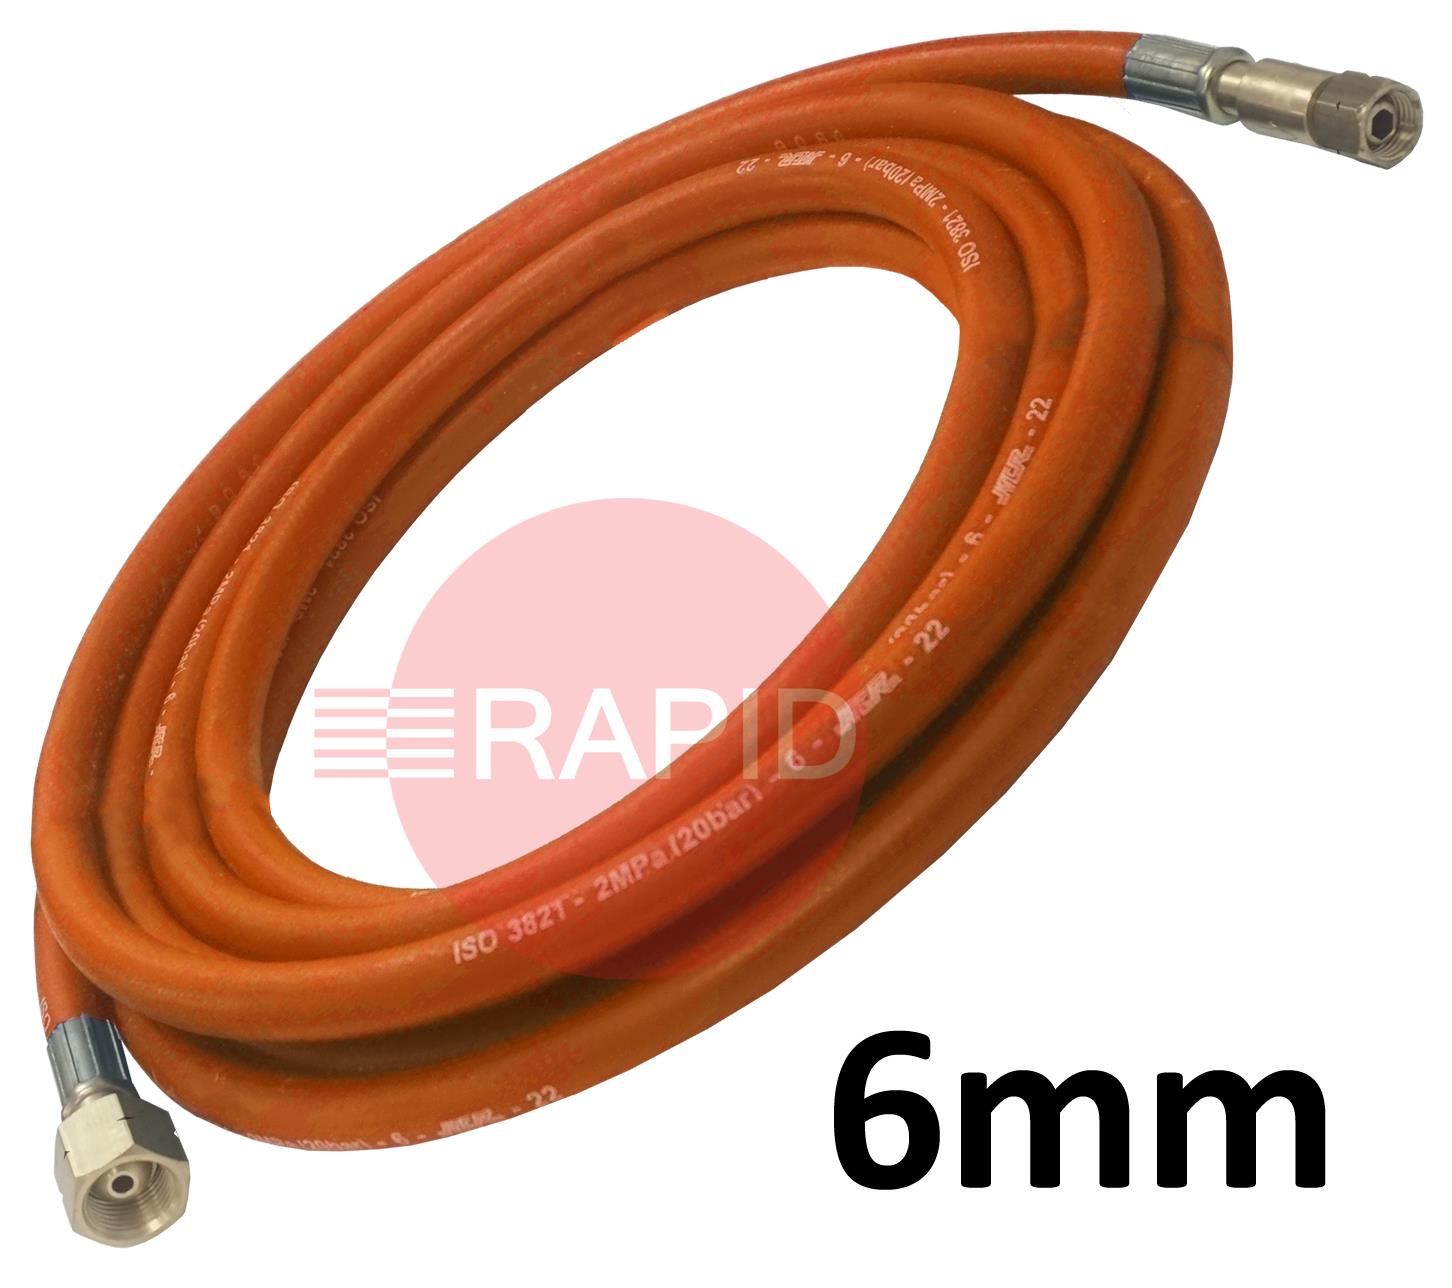 PROLTHOSE6MM  Fitted Propane Hose. 6mm Bore. G1/4 Check Valve & G3/8 Regulator Connection